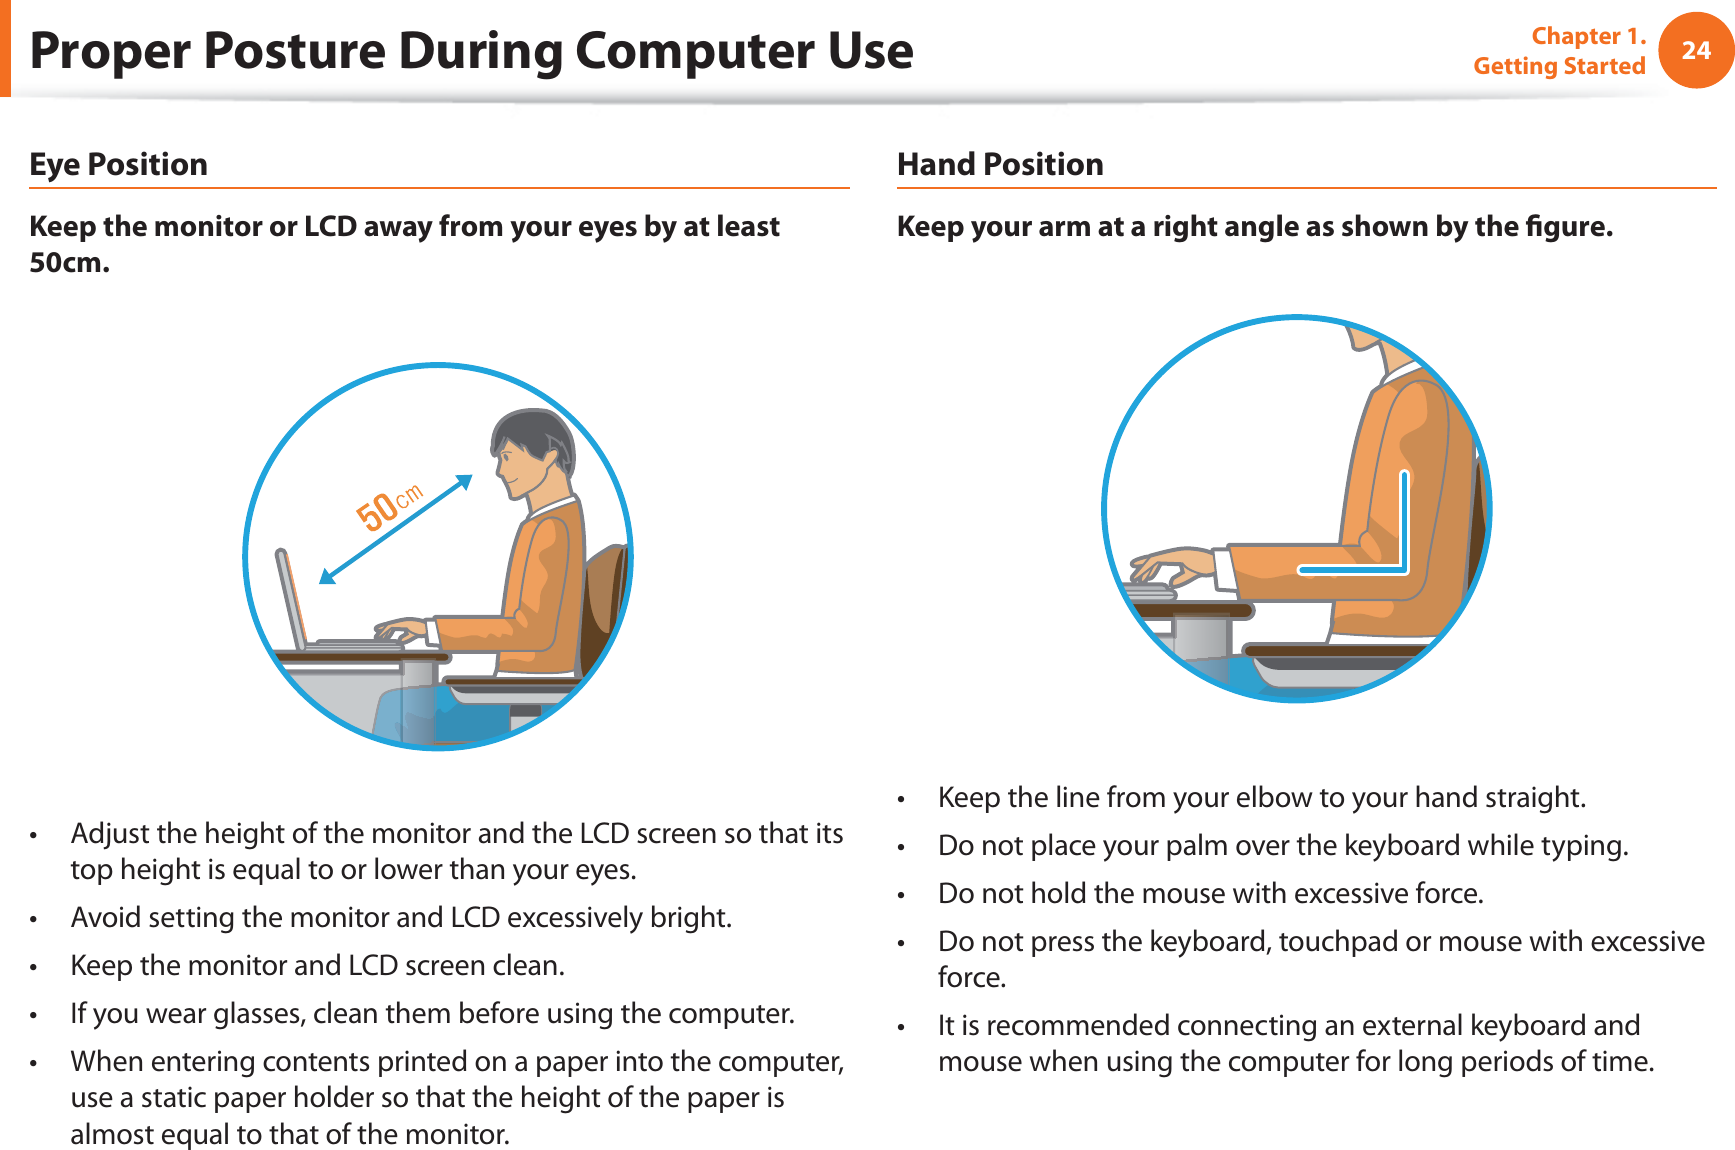 24Chapter 1. Getting StartedProper Posture During Computer UseEye PositionKeep the monitor or LCD away from your eyes by at least 50cm.Adjust the height of the monitor and the LCD screen so that its t top height is equal to or lower than your eyes.Avoid setting the monitor and LCD excessively bright.t Keep the monitor and LCD screen clean.t If you wear glasses, clean them before using the computer.t When entering contents printed on a paper into the computer, t use a static paper holder so that the height of the paper is almost equal to that of the monitor.Hand PositionKeep your arm at a right angle as shown by the  gure.Keep the line from your elbow to your hand straight.t Do not place your palm over the keyboard while typing.t Do not hold the mouse with excessive force.t Do not press the keyboard, touchpad or mouse with excessive t force.It is recommended connecting an external keyboard and t mouse when using the computer for long periods of time.